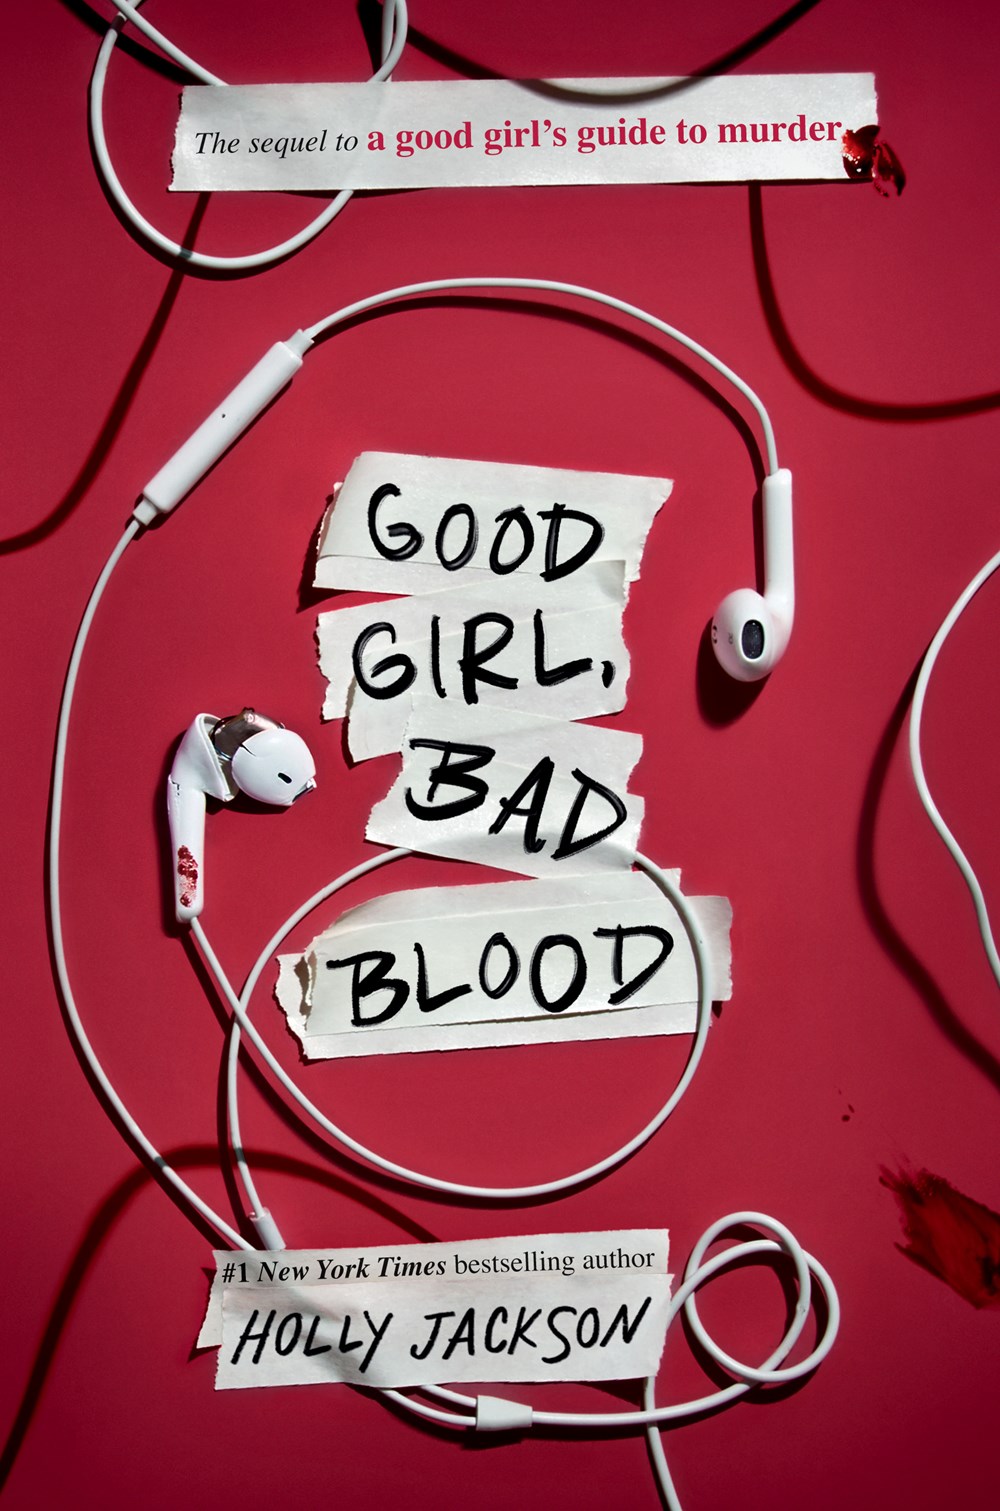 Good girl bad blood book cover